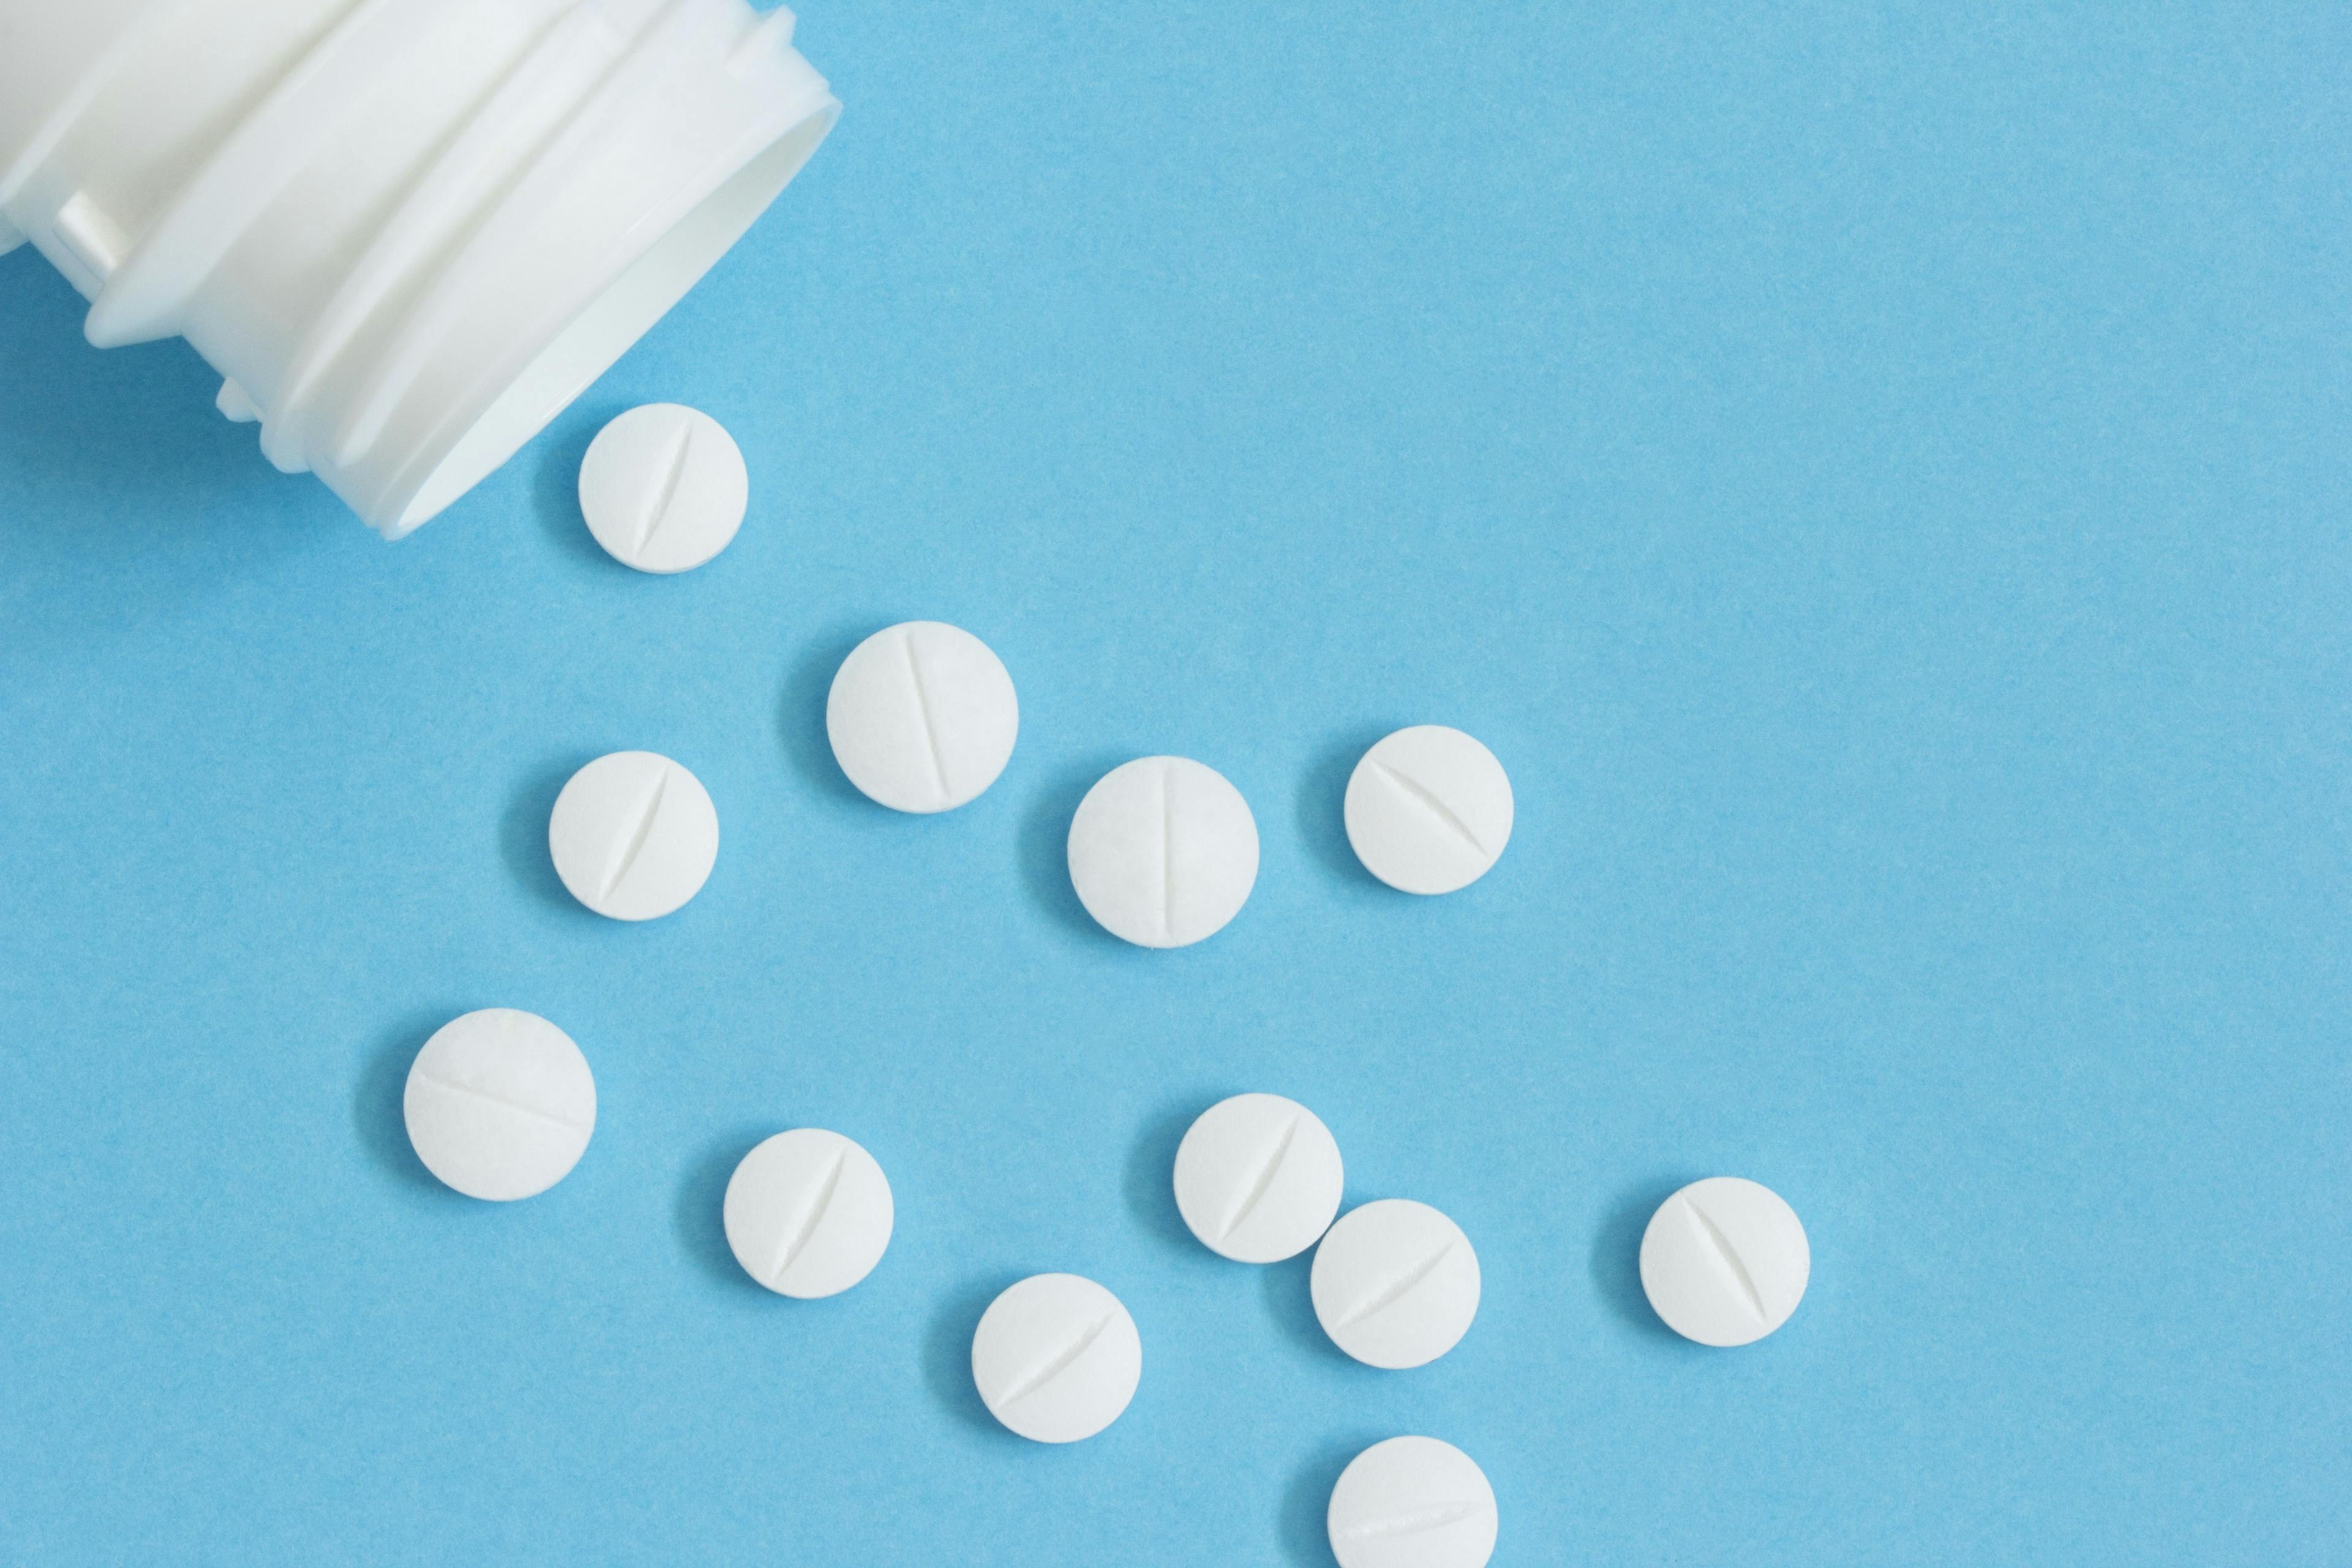 Older Diabetes Patients Twice As Likely to Report Preventive Aspirin Use